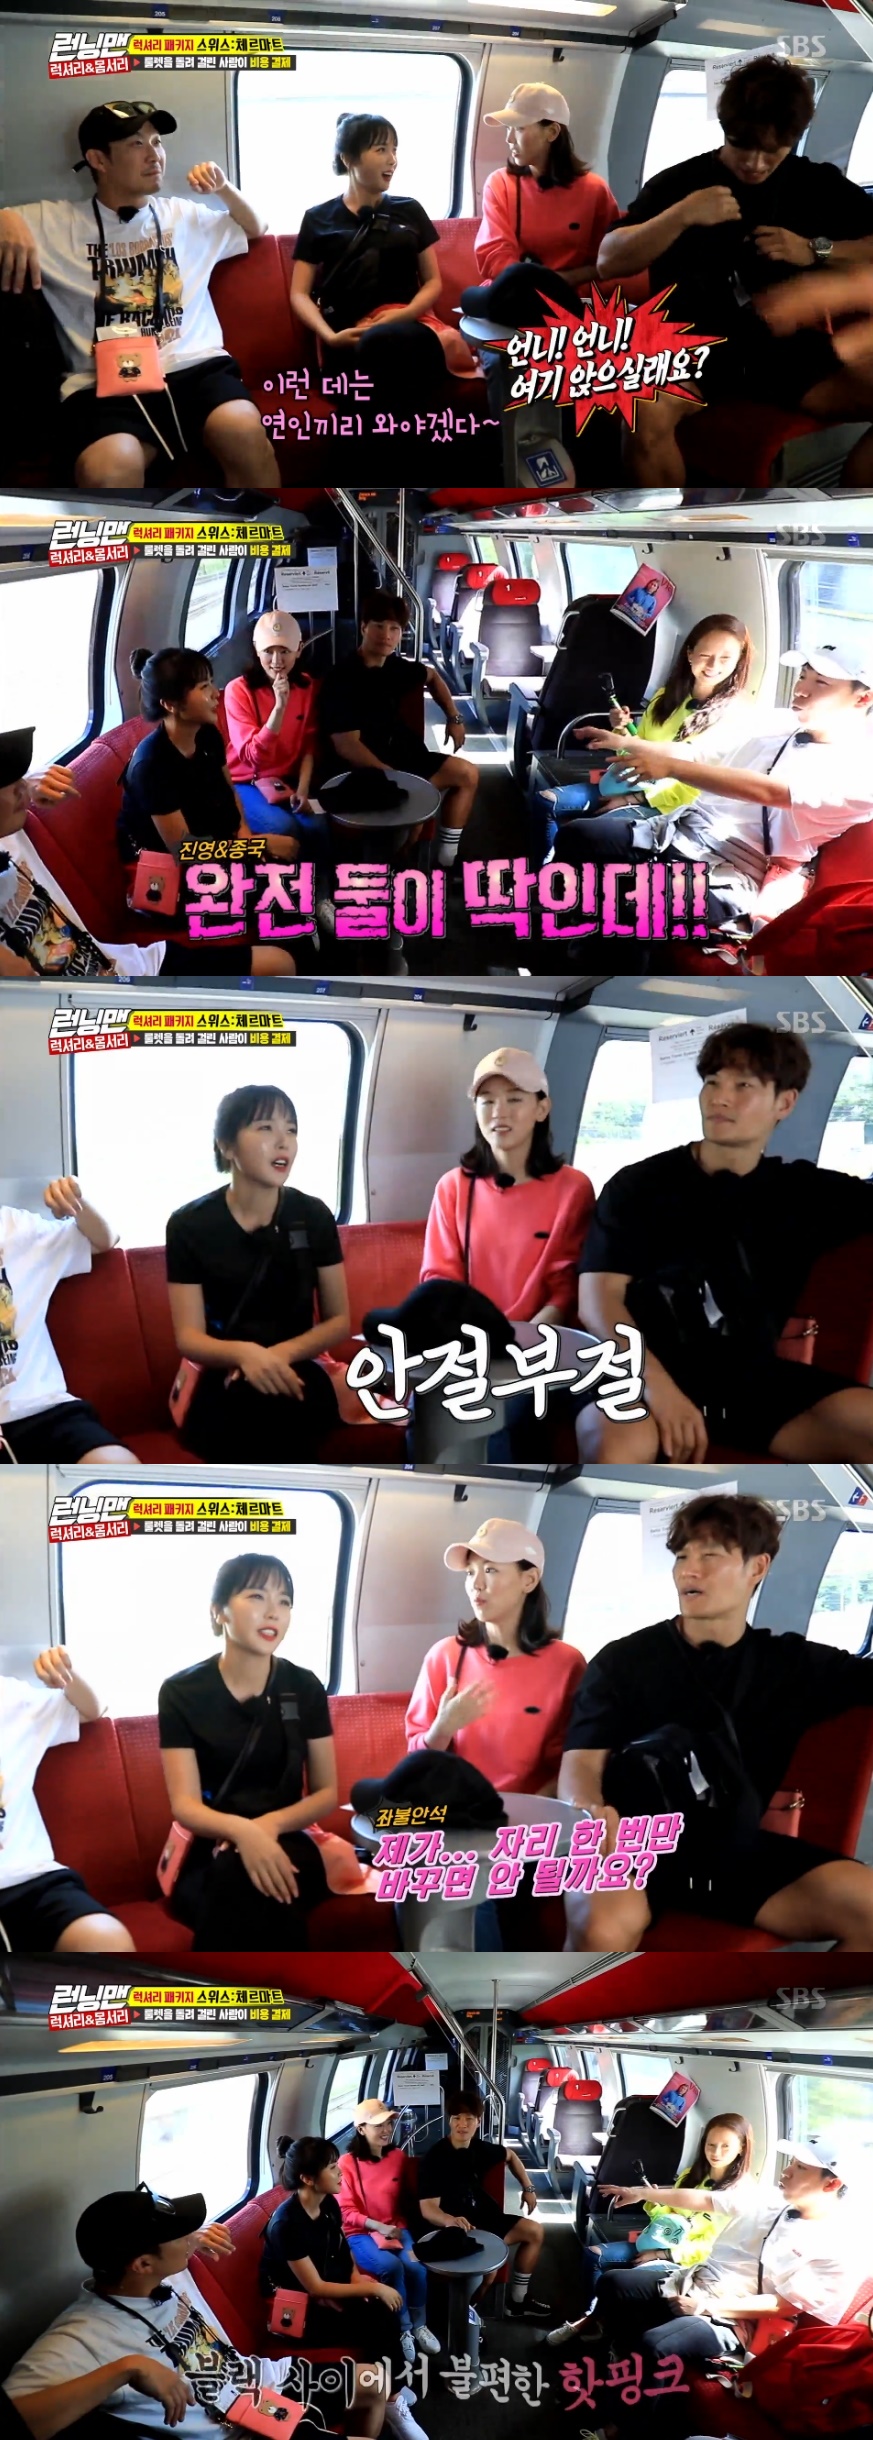 Singers Hong Jin-young and Kim Jong-kook once again were embroiled in a pink romance scandal, with the fifth couple showing off; members also actively cheered on the romance of the pair.On June 24, SBS Running Man, the members left for various places to record luxury & body frost package.Luxury package members Kim Jong-kook, Hong Jin-young, Song Ji-hyo, Haha, Yang Se-chan and Kang Han-Na will travel to Zermatt, Switzerland.On the other hand, the members of the body-surprising team, Yoo Jae-Suk, Jeon So-min, Lee Kwang-soo, Ji Seok-jin, Idahee and Lee Sang-yeop boarded the plane to England with a bitter expression.Running Man PD commented on the rules of the luxury package, saying, You have to experience all the Choices courses during the given schedule to return home.However, the cost of all the additional Choices courses should be your own. However, the production team will pay for the ticket, hotel, and basic course cost, he said. If no one comes out, I will turn the half-roulette, half-member of the production team.There is a last refund for the members who wrote the expenses before returning home. Kim Jong-kook said, Is not this just ?Micheling would be expensive in this kind of place, he said.Among them, Hong Jin-young and Kim Jong-kook, who have been playing a playful love line, once again entered the pink air current.Both of them gathered at the airport in all black costumes. Kim Jong-kook asked Hong Jin-young, I wonder, but do you have black clothes at home?This is a real Misunderstood, but dont Misunderstood, Hong Jin-young said. I originally like black.Kim Jong-kook said, I like it originally? I look for all the old data.According to the crew of Running Man, Zermatt, which the members found, is one of the 50 places to go before death selected by the BBC.Because you can enjoy summer PFC Levski Sofia in the Alps.The members decided to take the summer PFC Levski Sofia with Xavi, and got on the train for the move.I have to come to this place with lovers, said Hong Jin-young, who was impressed by the cozy romantic train.Yang Se-chan looked at Kim Jong-kook and Hong Jin-young and teased, The two are perfect.Kang Han-Na, who was sitting between Kim Jong-kook and Hong Jin-young, said, Can not you change your seat once?I think its the most unnatural thing Im here. This is not the first time that members have mischievous doubts about the two. This is the first time that SBS Ugly Our Little has attracted a lot of attention by creating a pink atmosphere.In Running Man, the members were suspicious of recording in May as a fashion reminiscent of four couples in the final race recording of the Family Global Package Project.hwang hye-jin